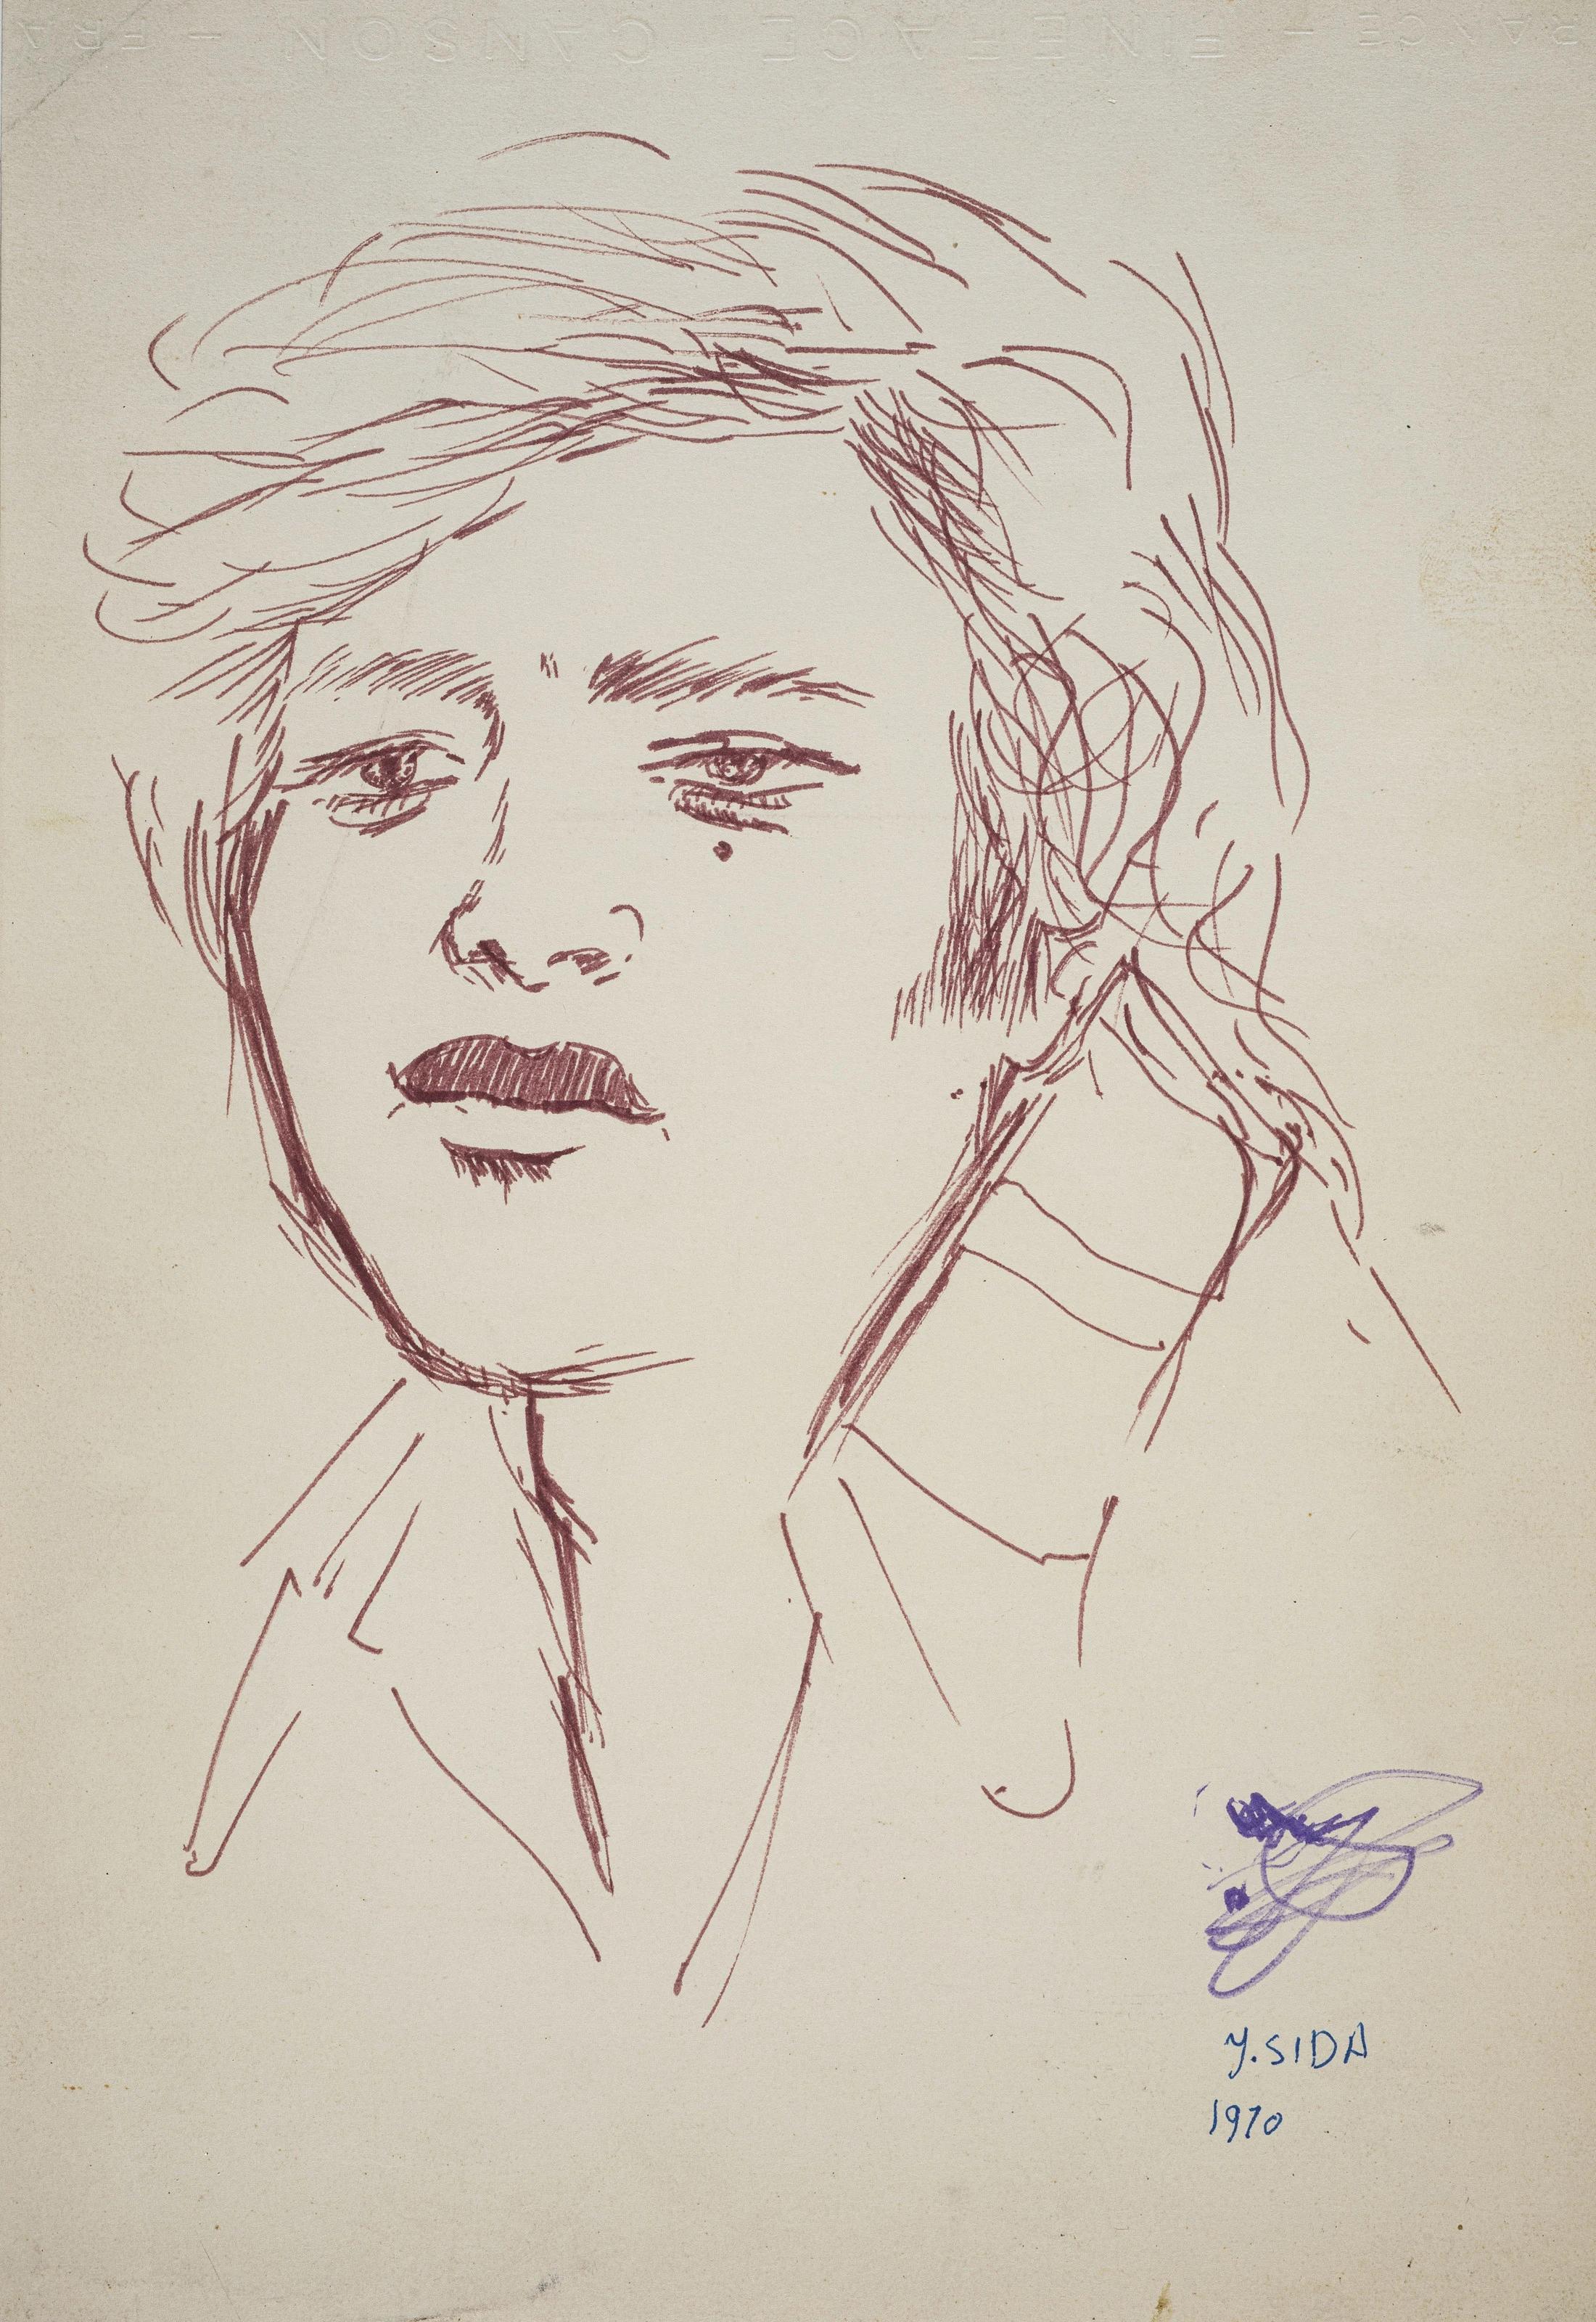 "Portrait of Boy" Portrait Drawing 14" x 10" inch (1970) by Youssef Sida

Signed and dated 1970

Youssef Sida
1922-1994
Born in 1922 in Damietta, and in 1945 he got his degree from the Higher Institute of Educational Art. In 1947, he participated in